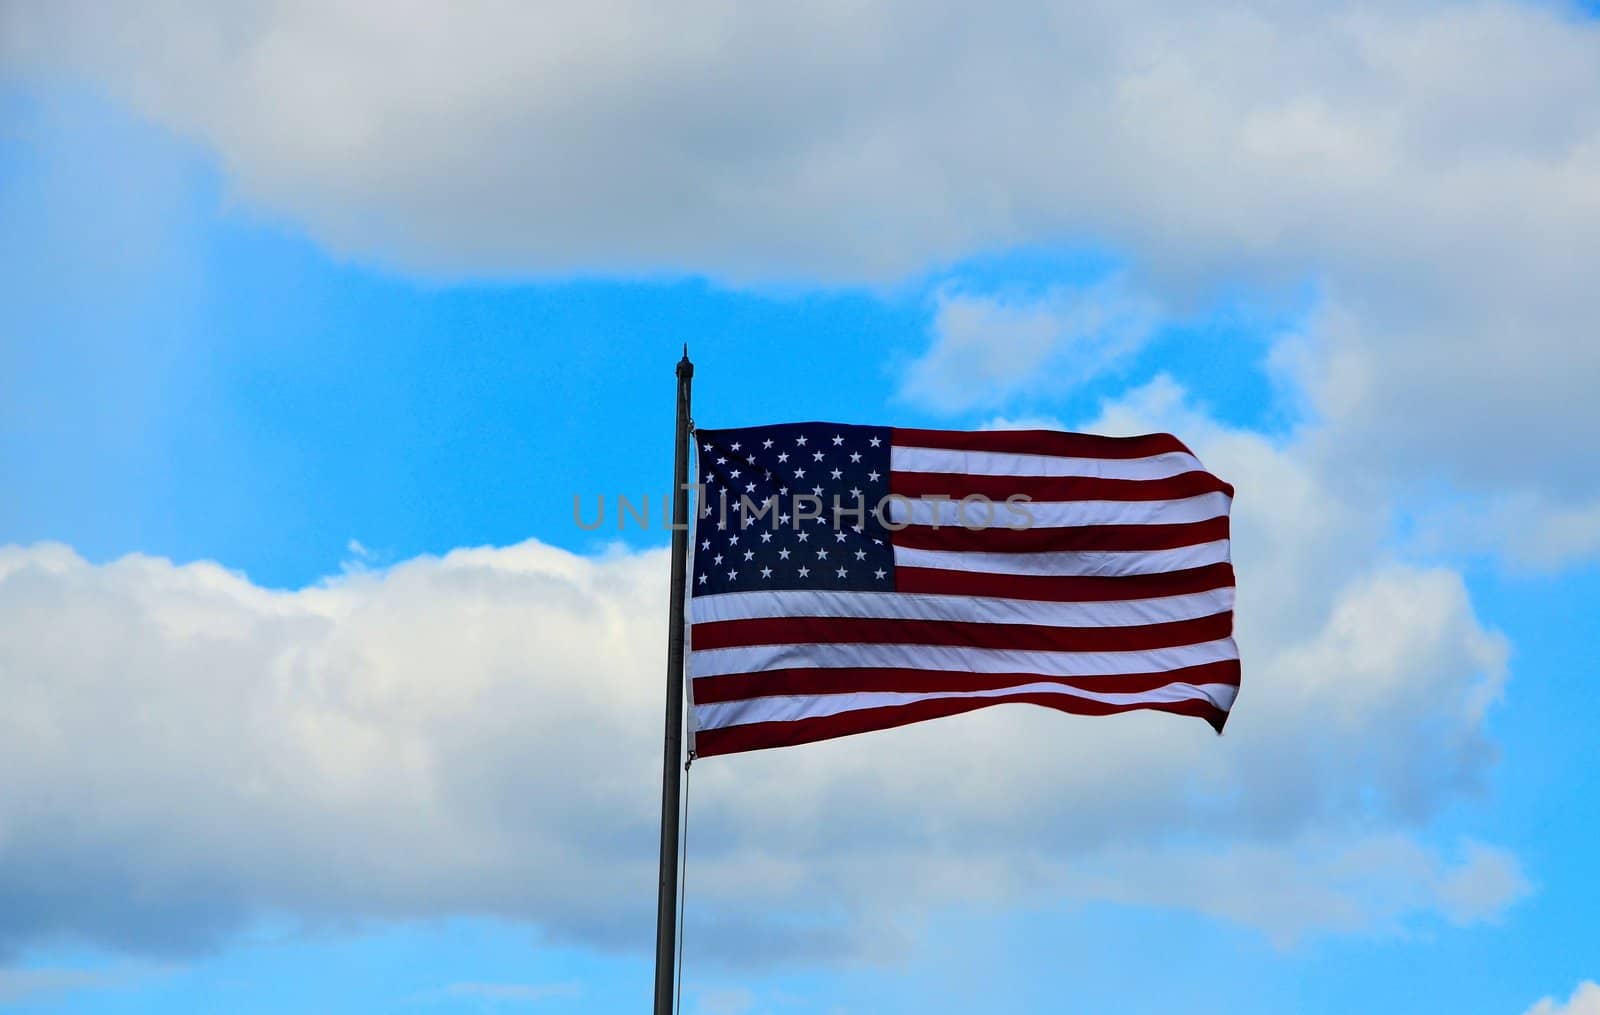 Old glory by northwoodsphoto